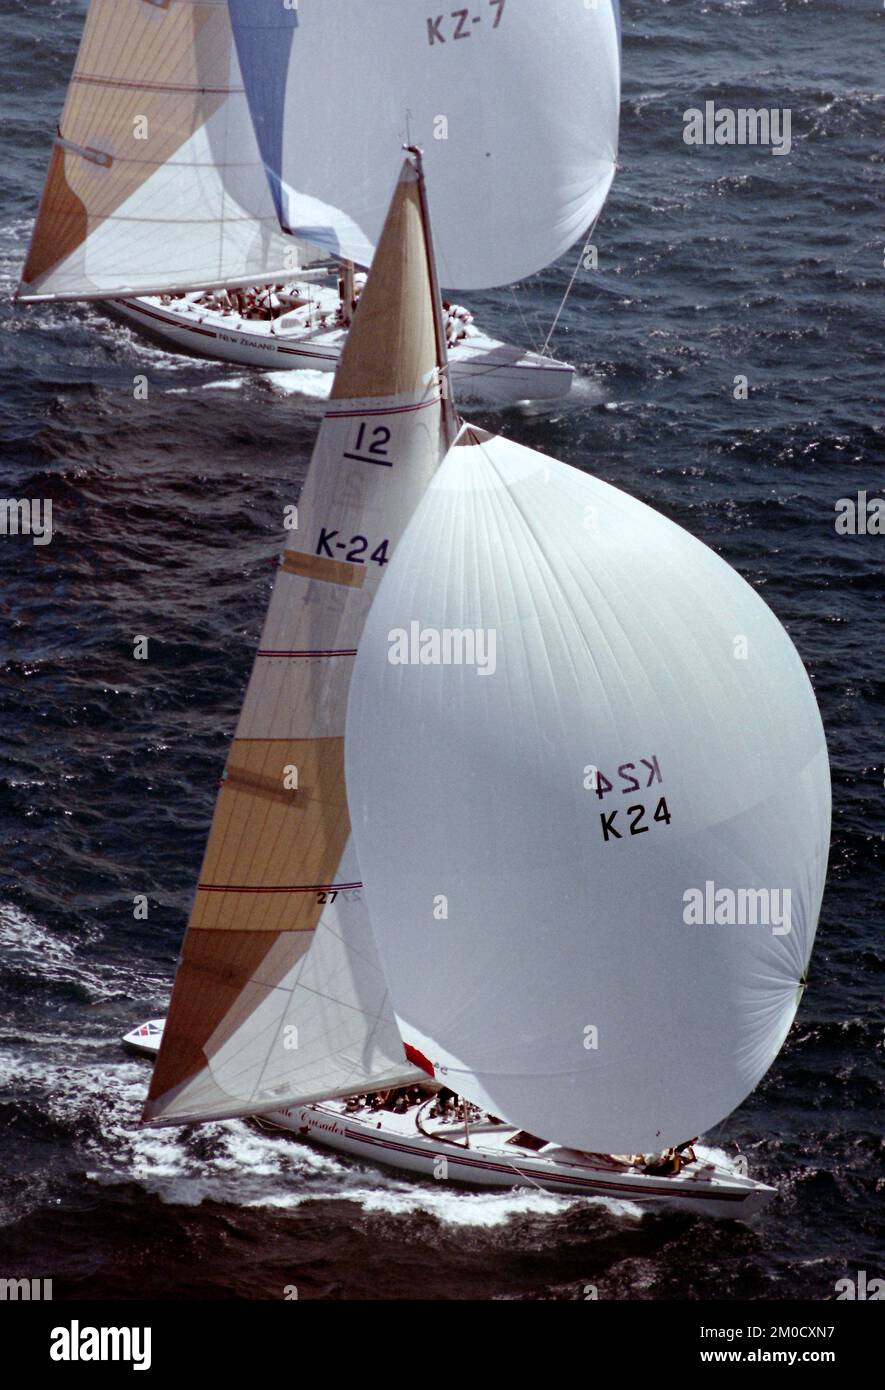 AJAXNETPHOTO. OCT, 1986. FREMANTLE, AUSTRALIA. -AMERICA'S CUP - LOUIS VUITTON CUP - CHALLENGER ELIMINATIONS - WHITE CRUSADER (GB ) ON GAGE ROADS CHASED BY NEW ZEALAND'S KIWI MAGIC KZ-7. PHOTO:JONATHAN EASTLAND/AJAX. REF:1321091 1106 Stock Photo